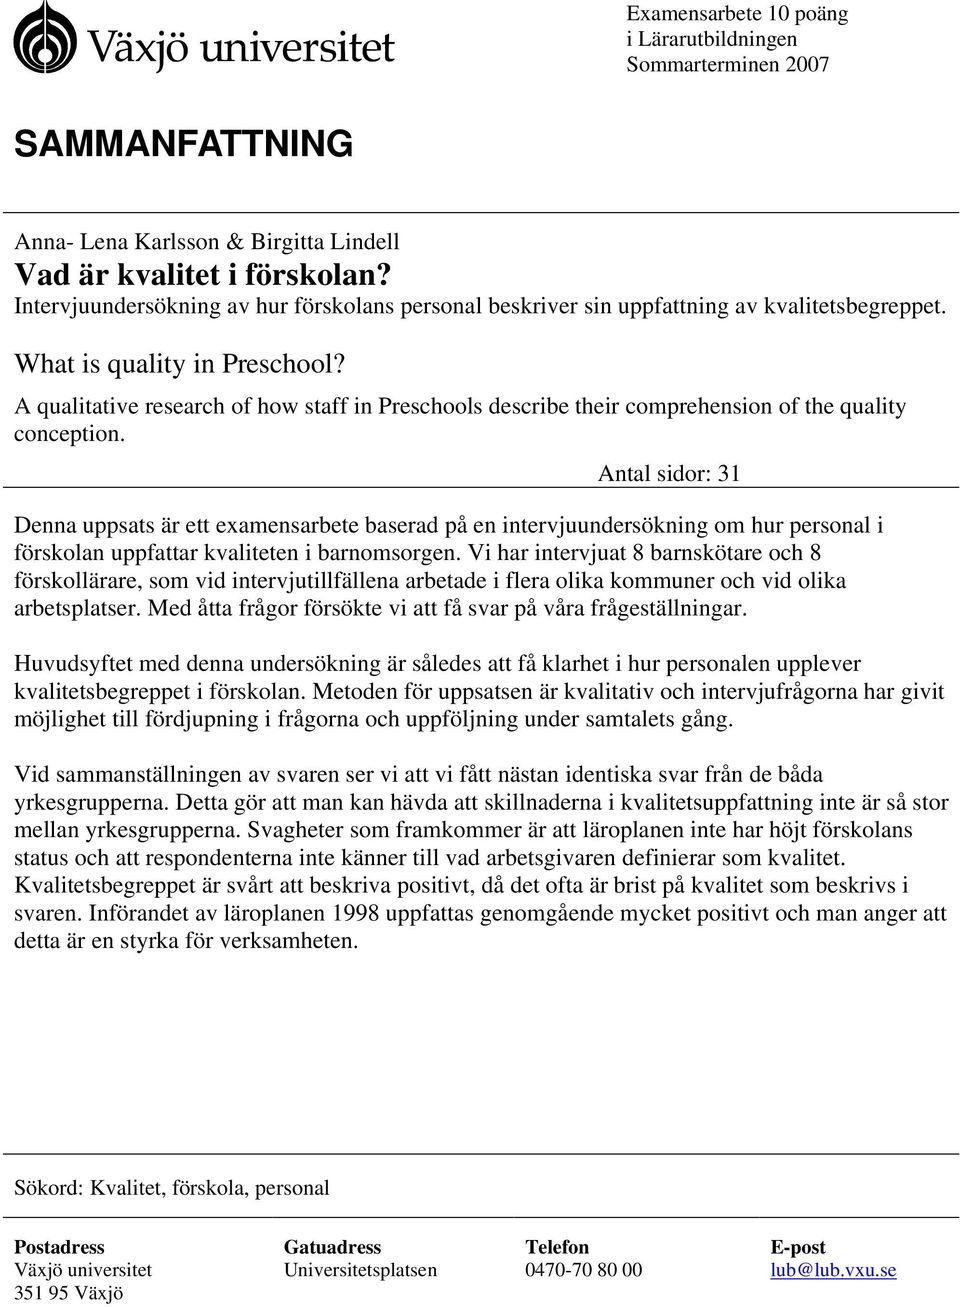 A qualitative research of how staff in Preschools describe their comprehension of the quality conception.